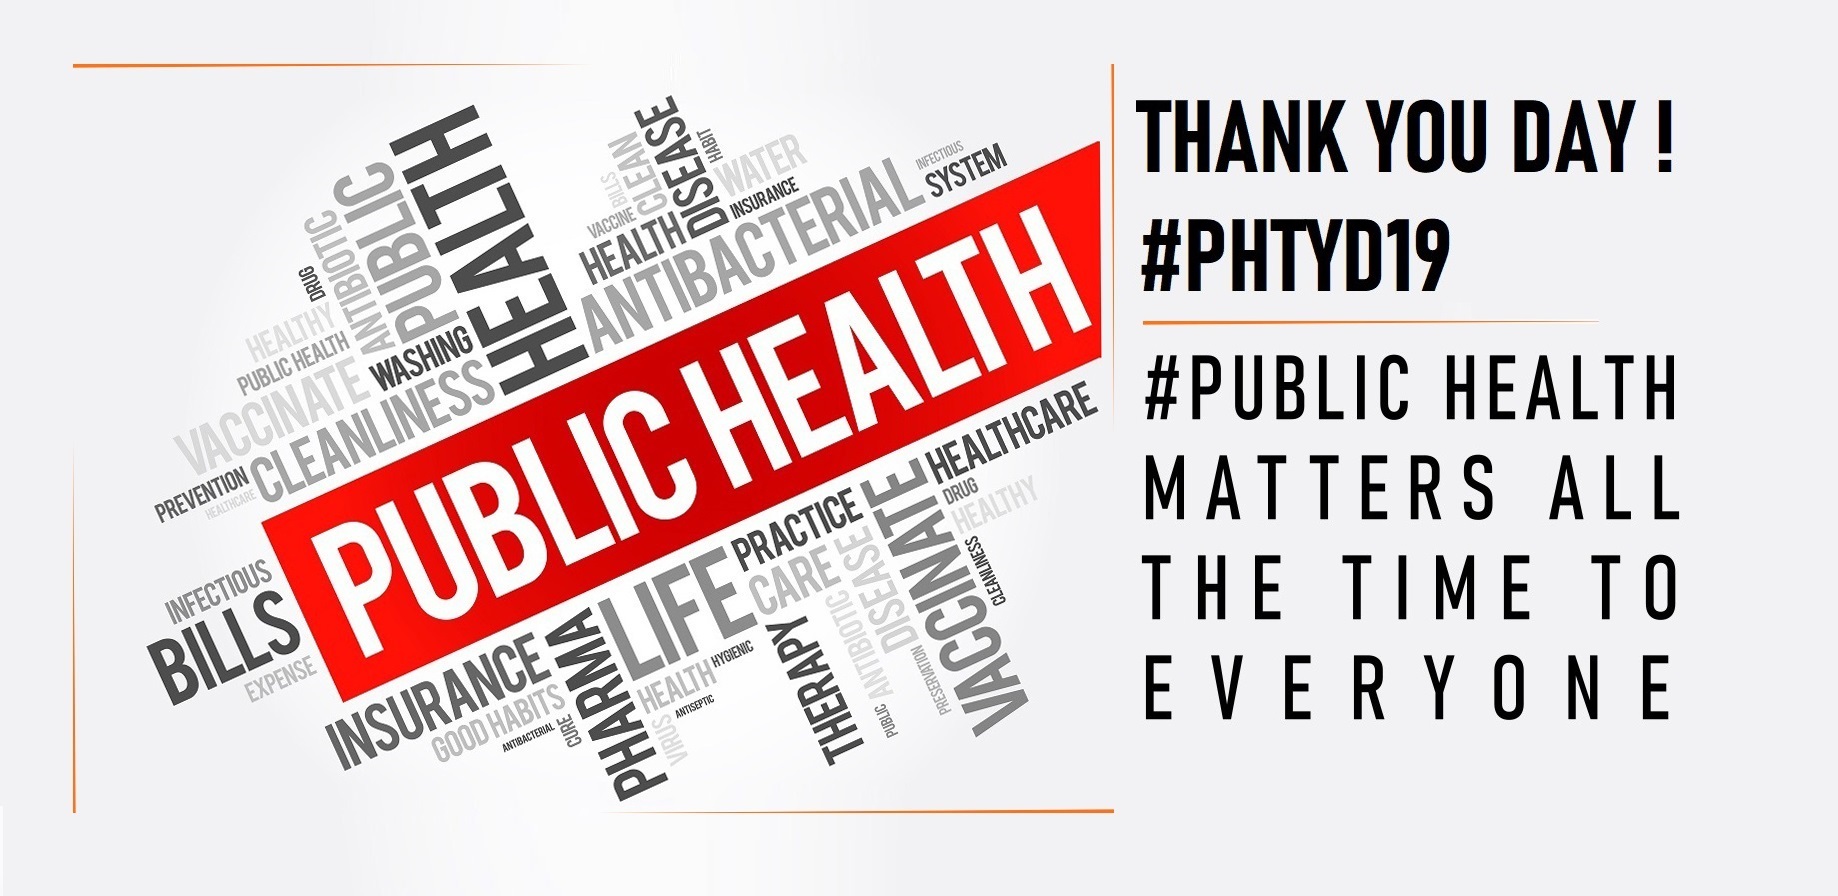 #PublicHealth Matters ALL the time to EVERYONE – Public Health Thank You Day #PHTYD19